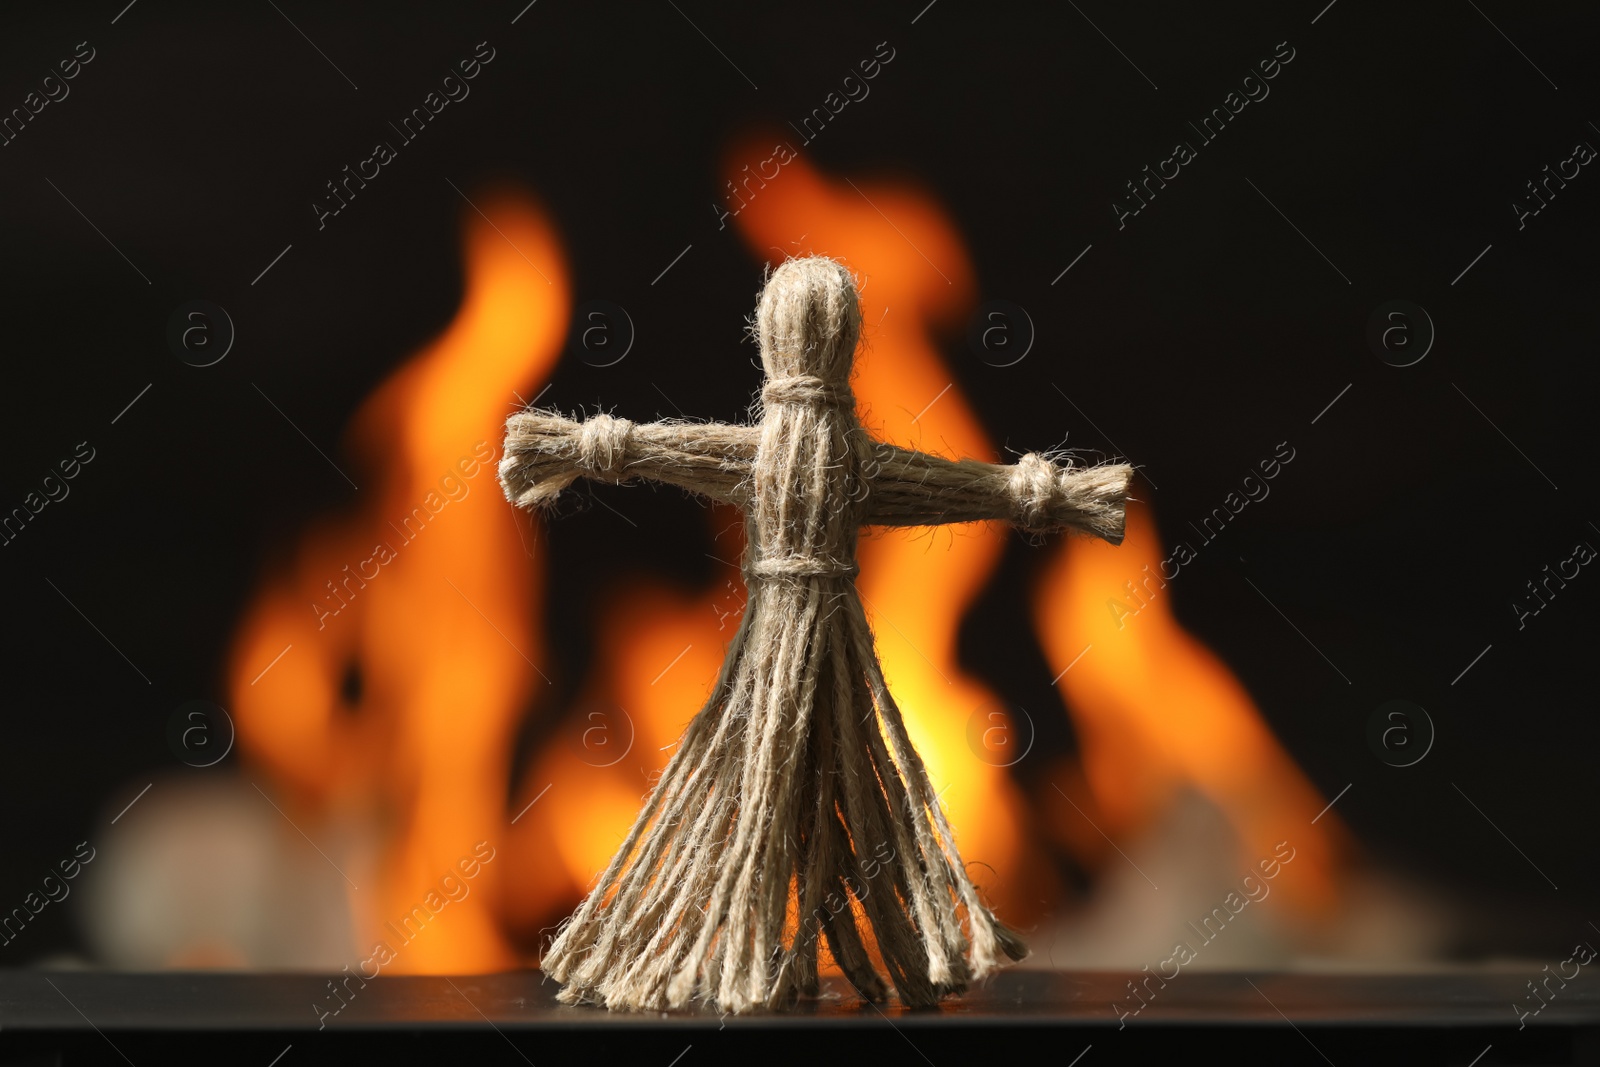 Photo of Voodoo doll on black table against blurred flame. Curse ceremony